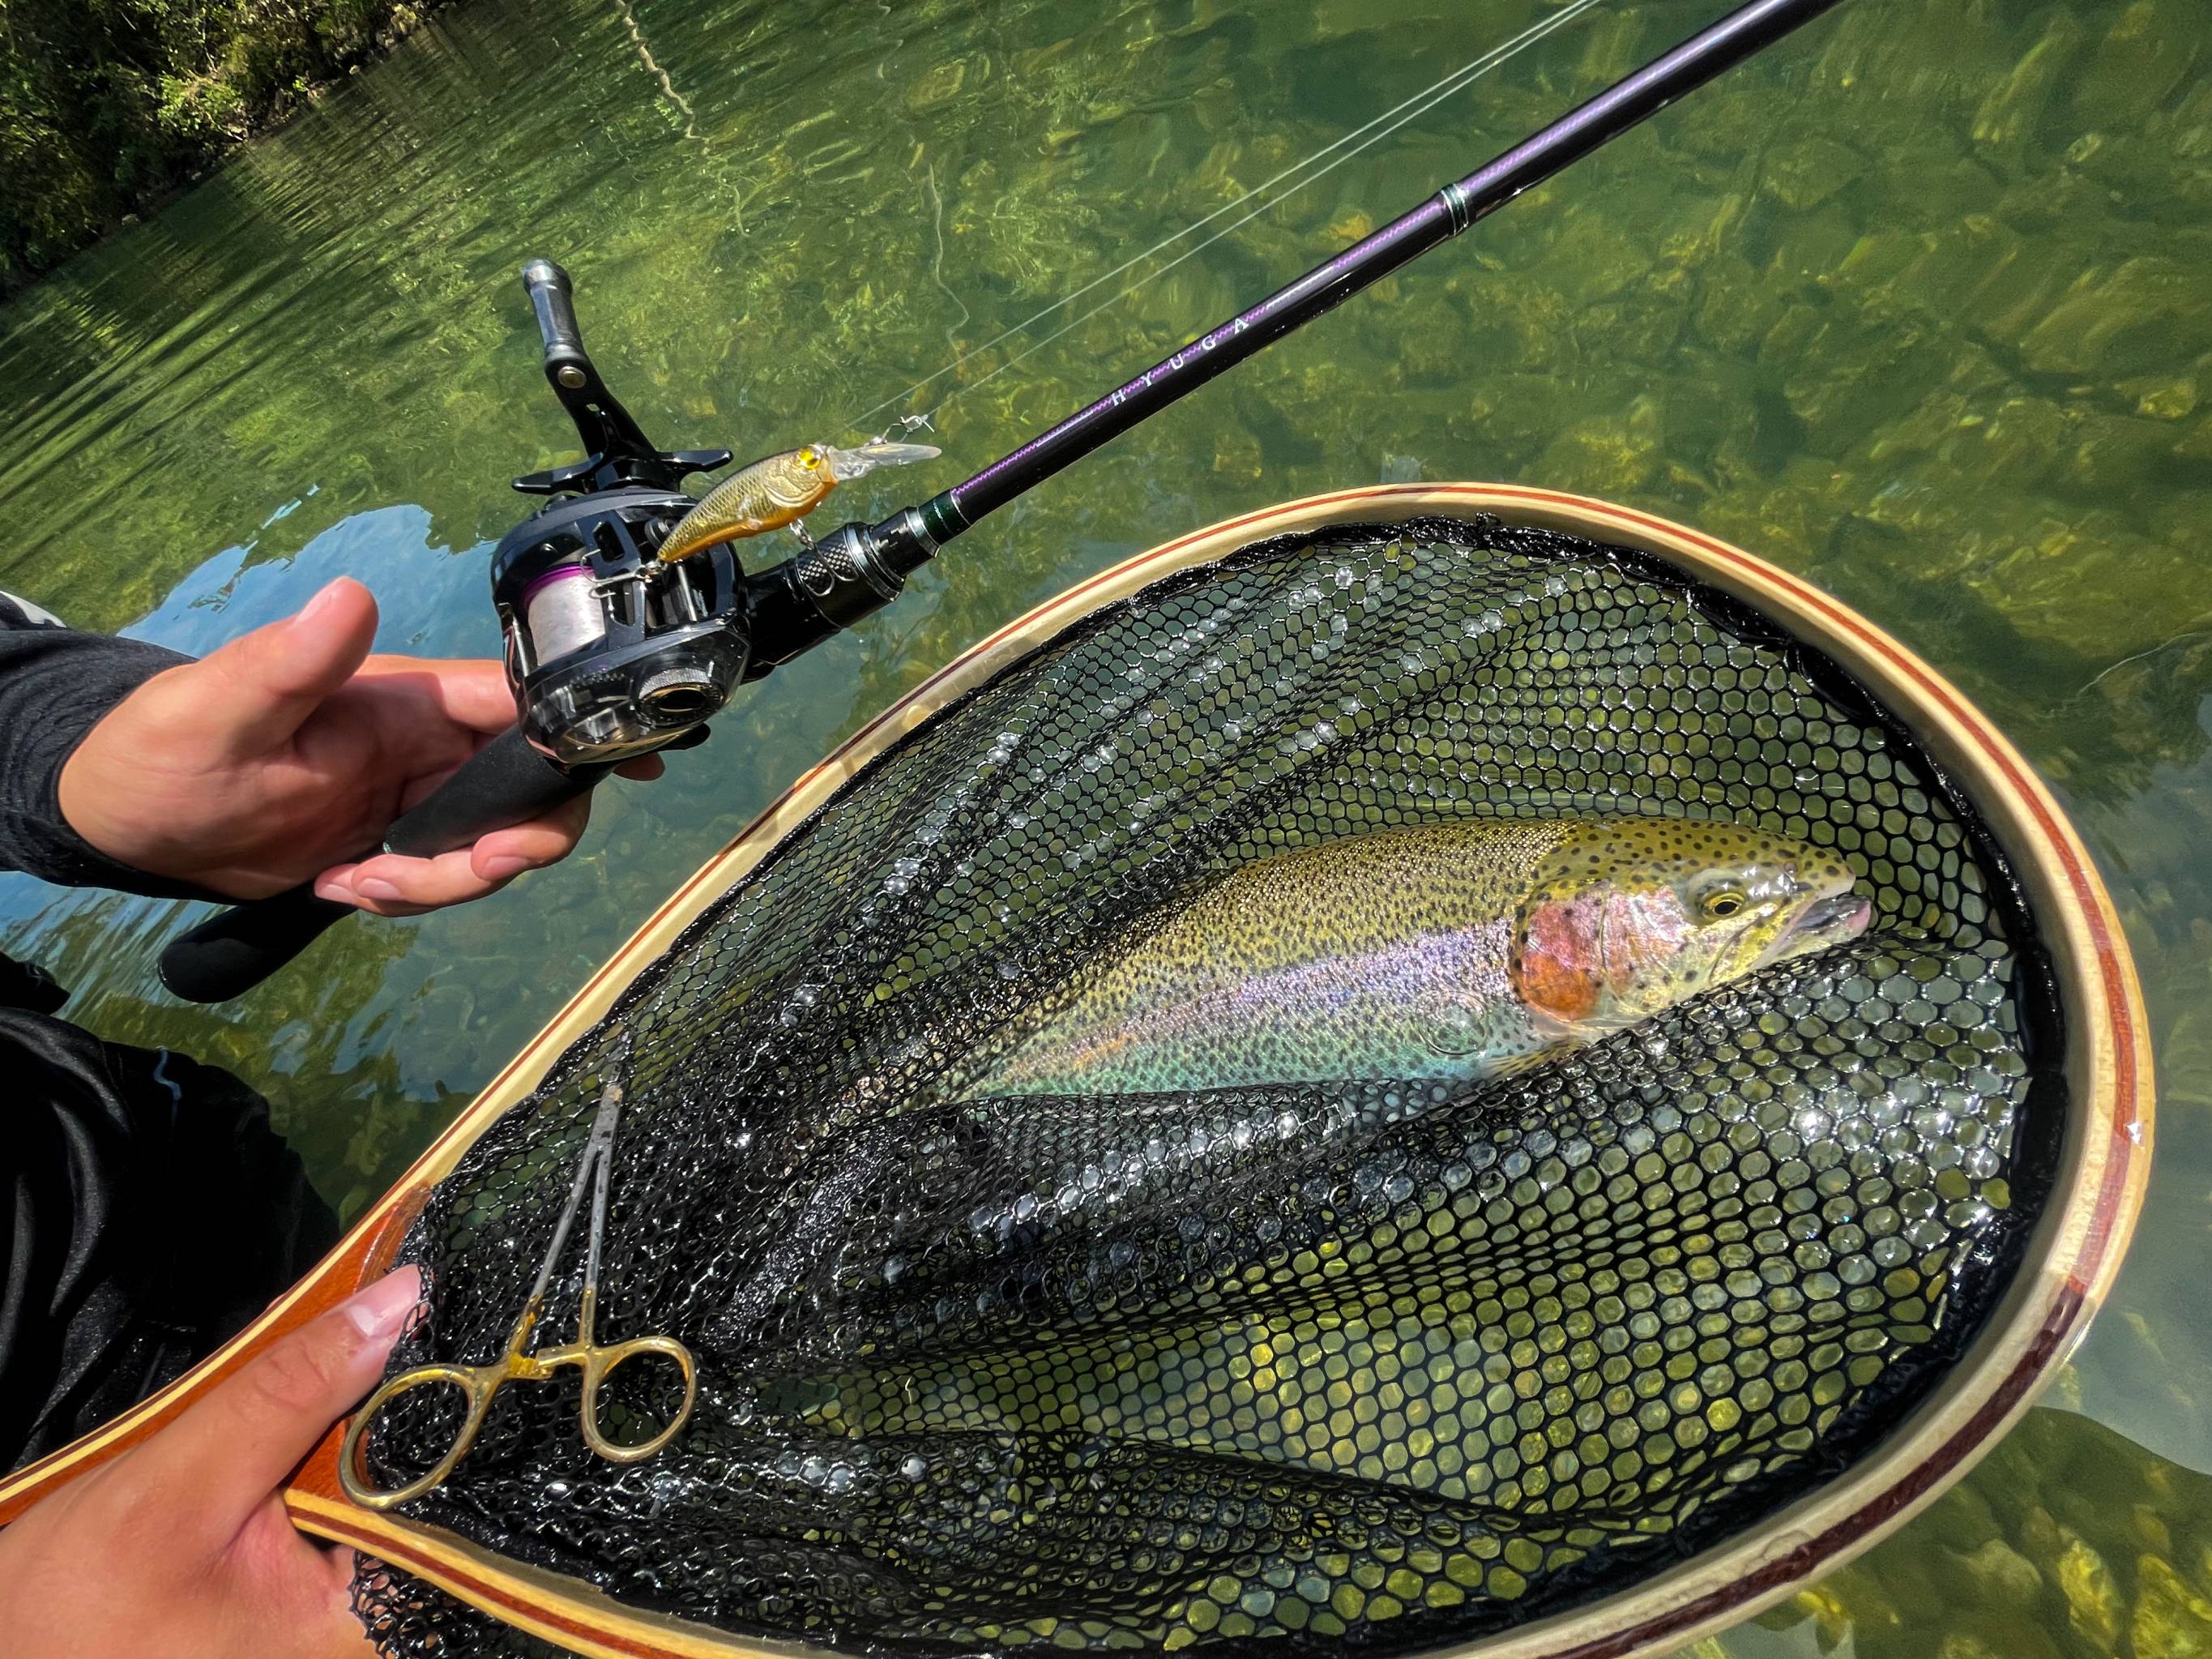 Fenwick Fishing - No better time than now to gear up for some fly fishing.  Shop our full lineup of fly products here